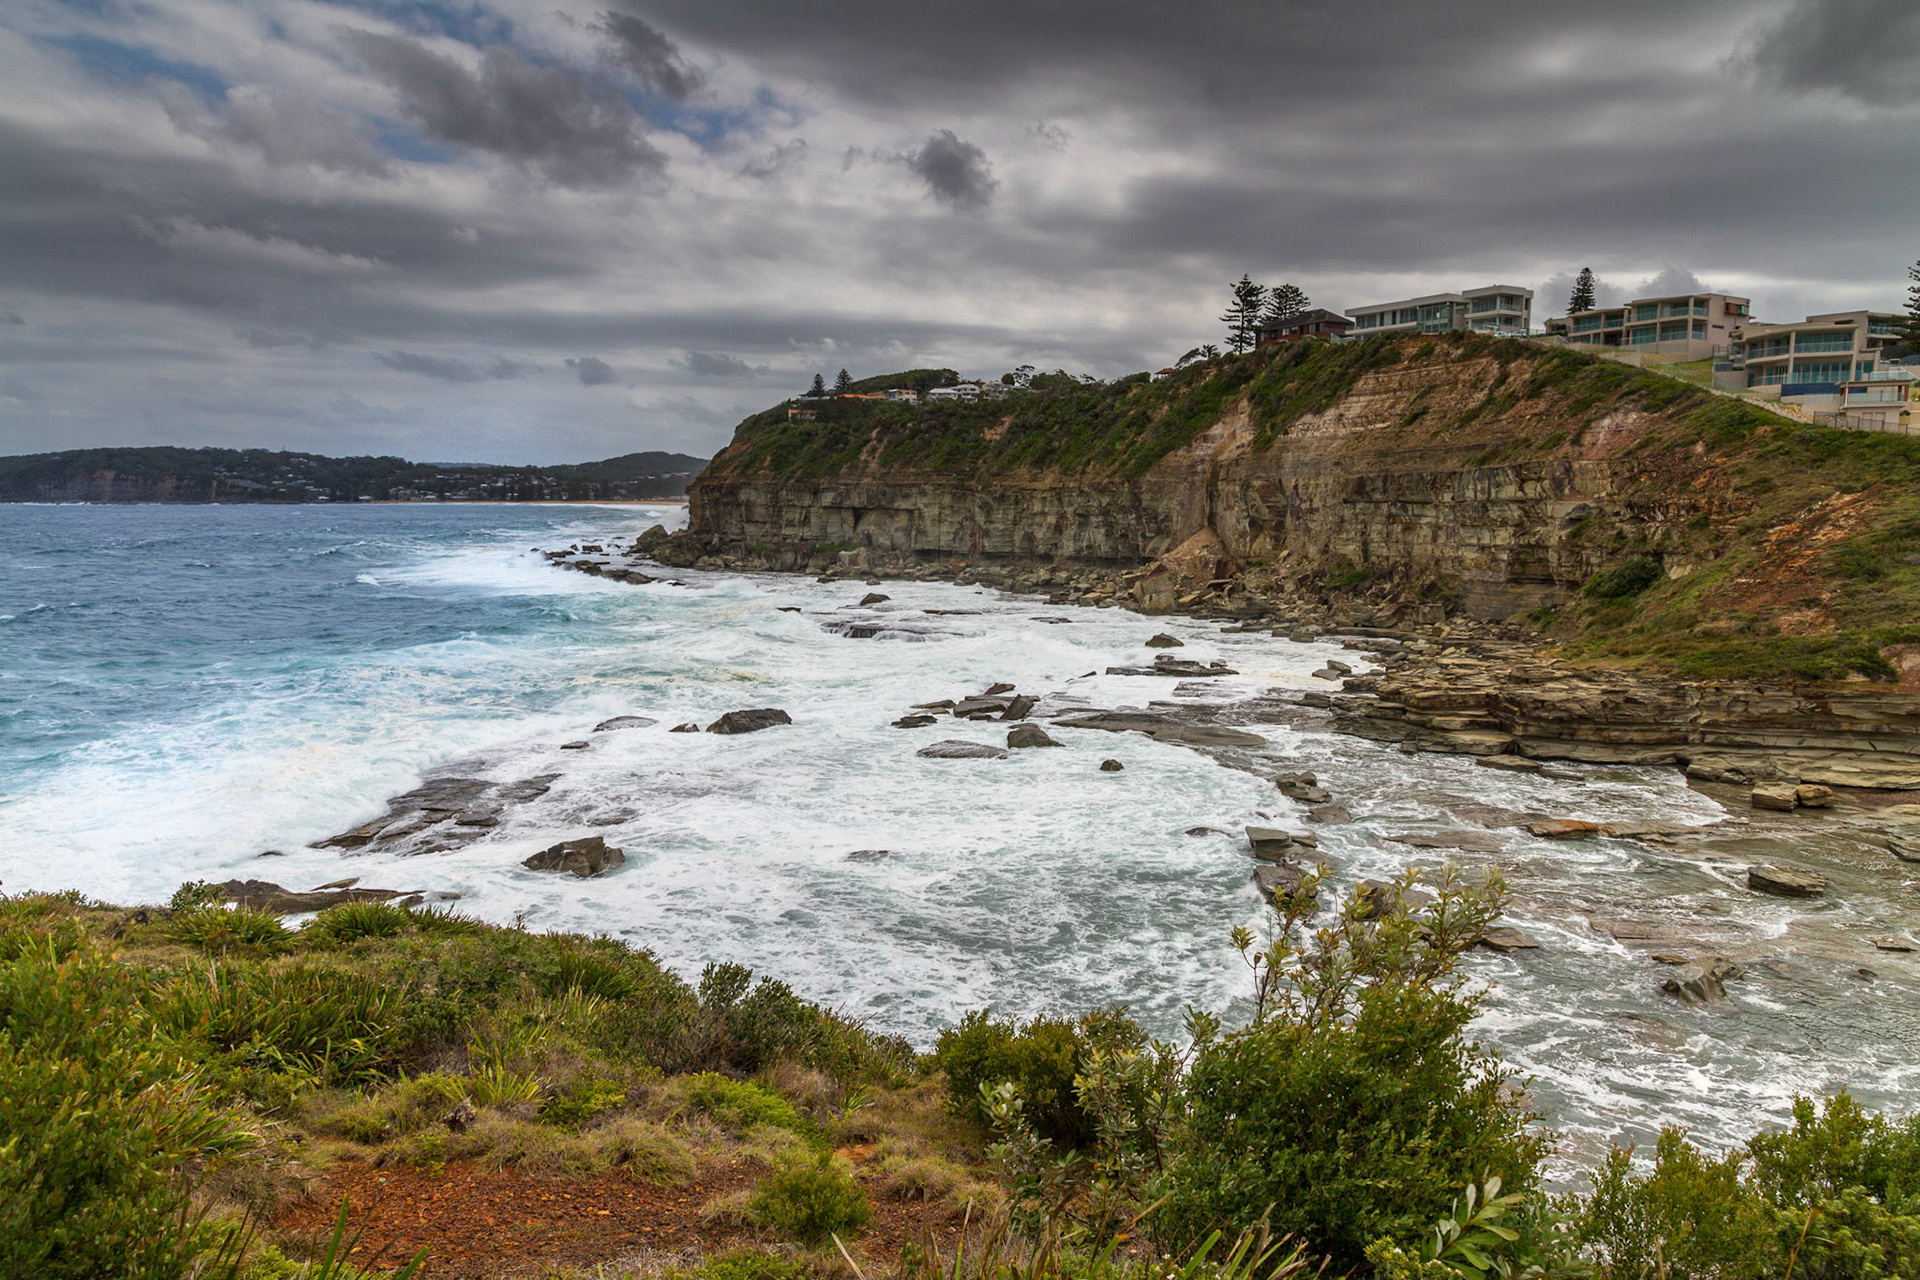 The Skillion at Terrigal on the Central Coast NSW Australia where Central Coast Digital Media runs its business and has a partnership with designrush